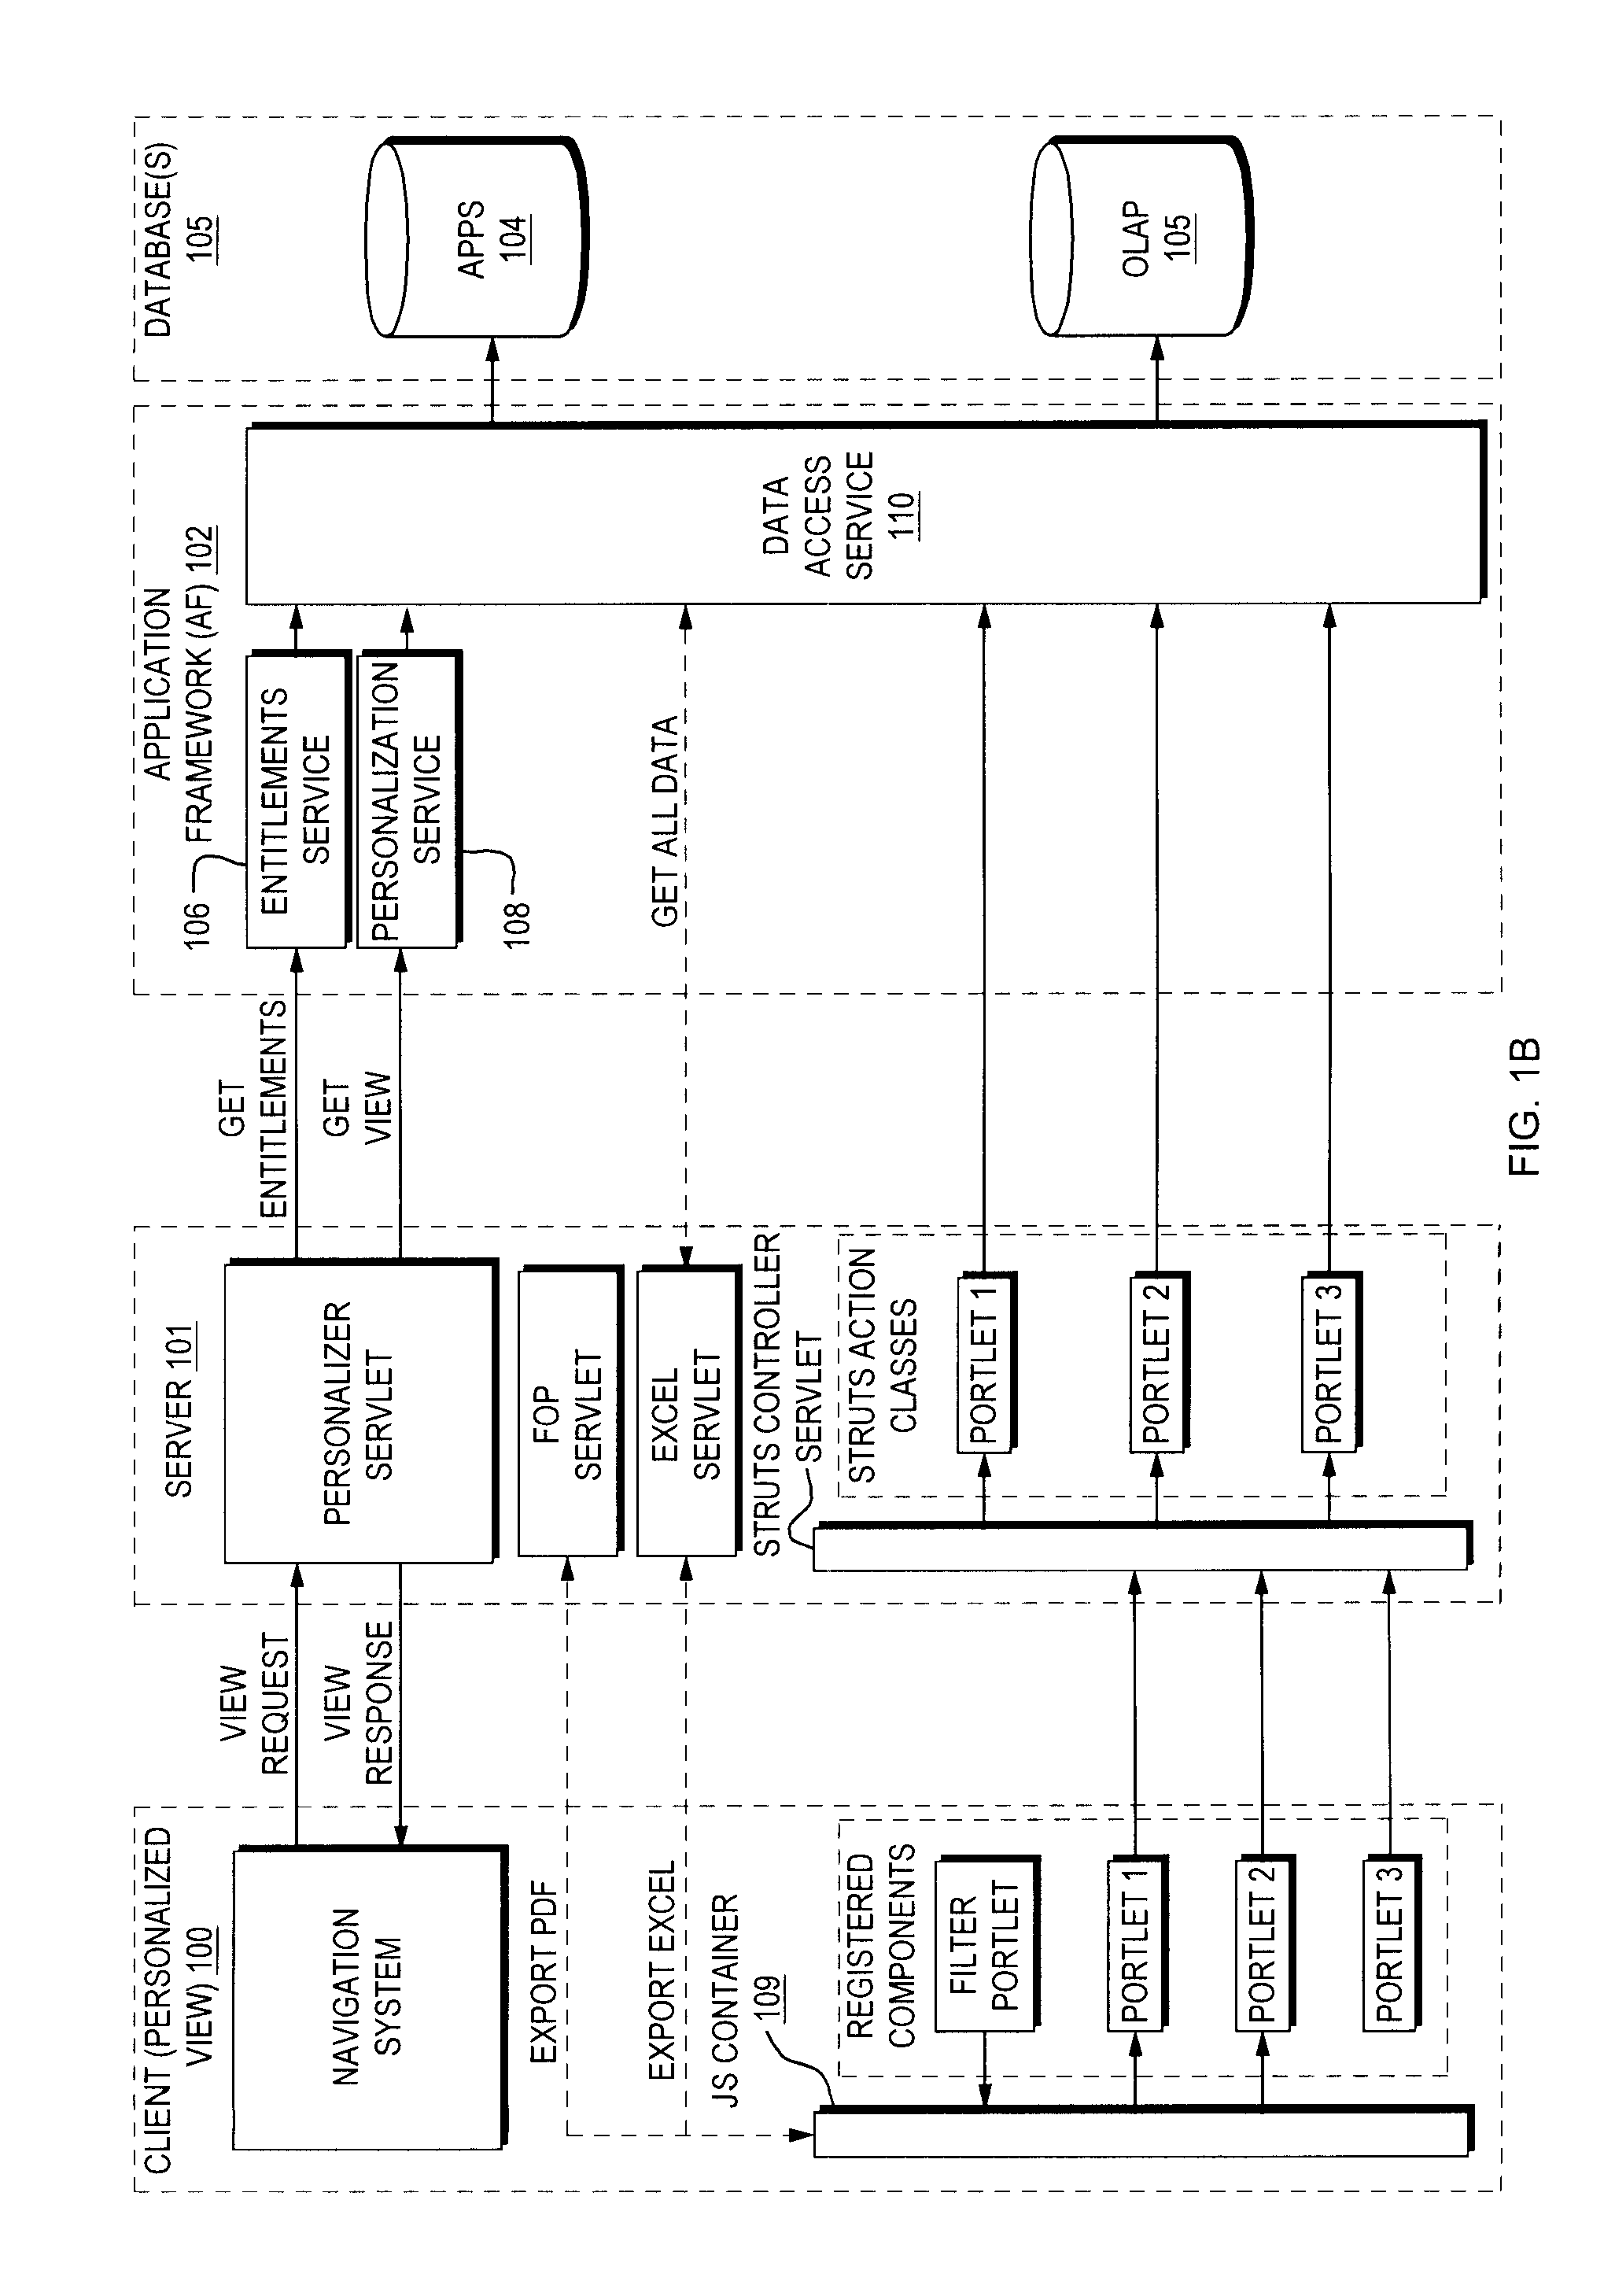 Method and system for implementing portal